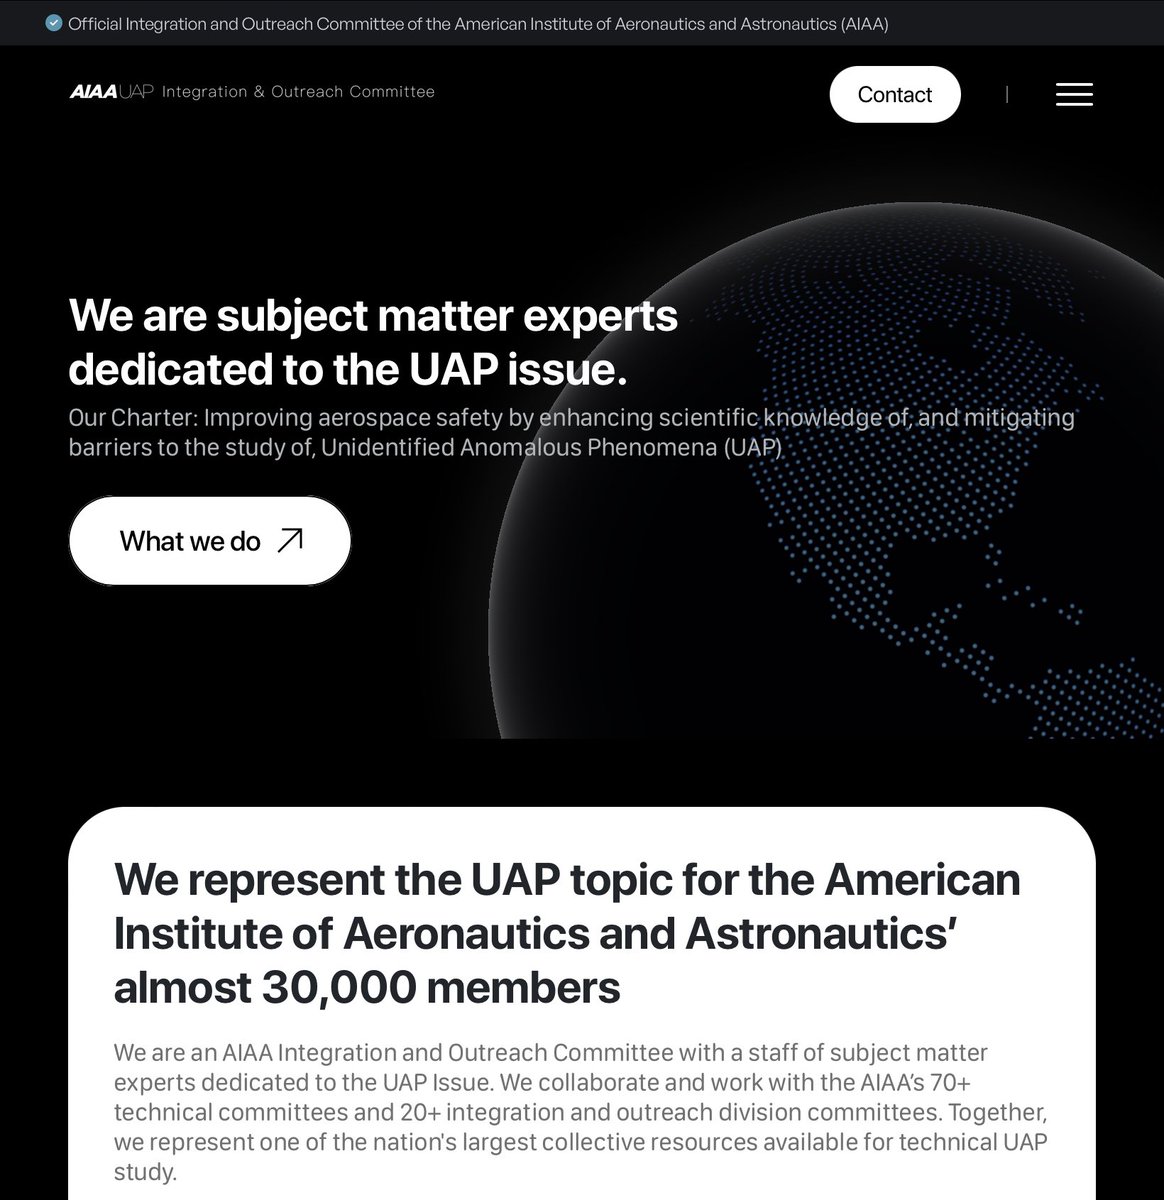 @iamjohnoliver @LastWeekTonight 
Speaking of the need for more scientific inquiry and data-based investigations into UAP, did you know that the world’s largest aviation technical society, the AIAA, has its own UAP committee? They just launched their new website, which includes